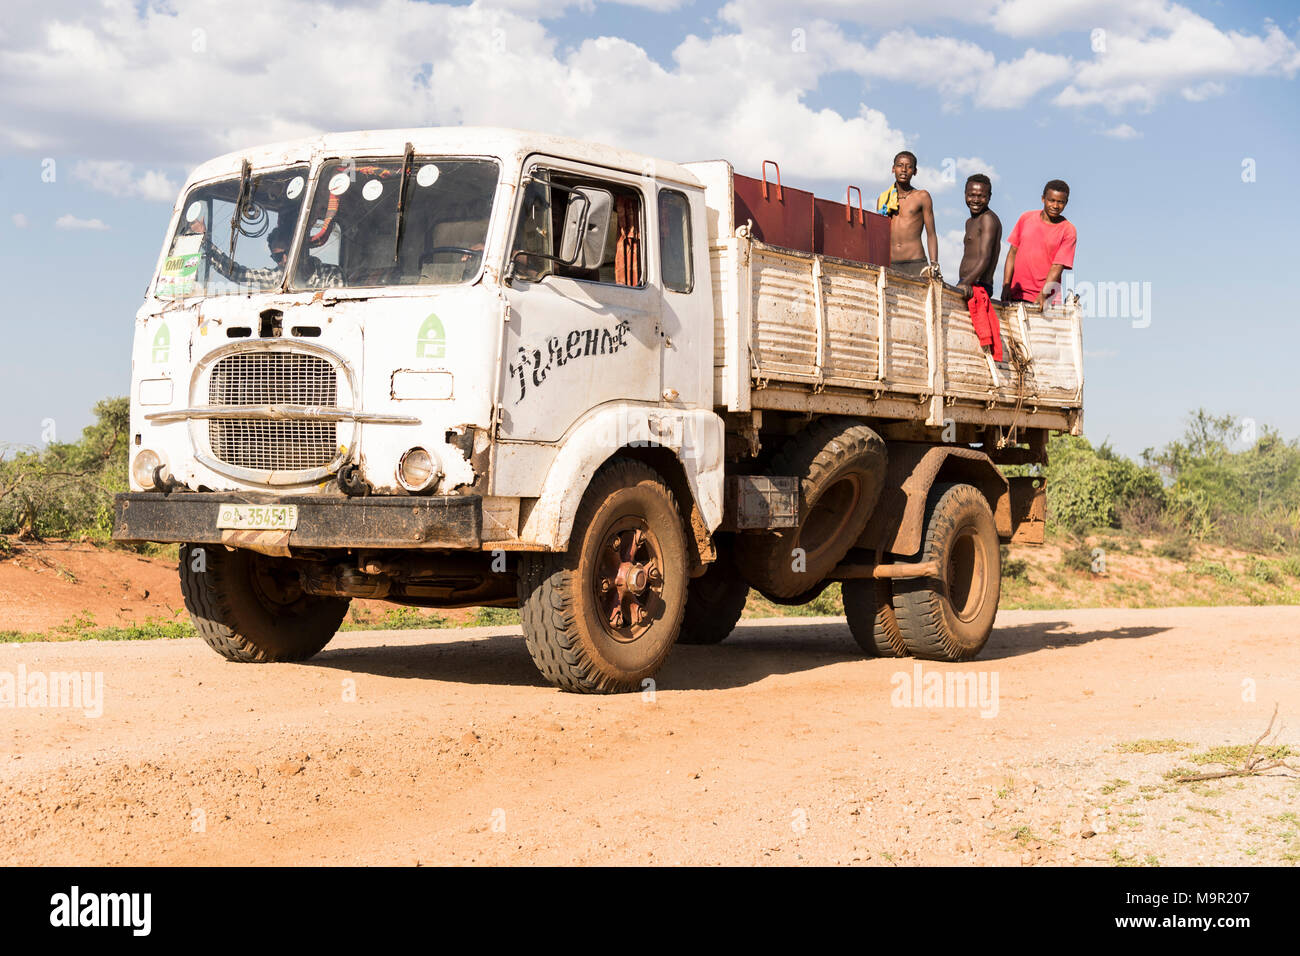 Truck with farm workers on load space, country road near Turmi, Southern Nations Nationalities and Peoples' Region, Ethiopia Stock Photo